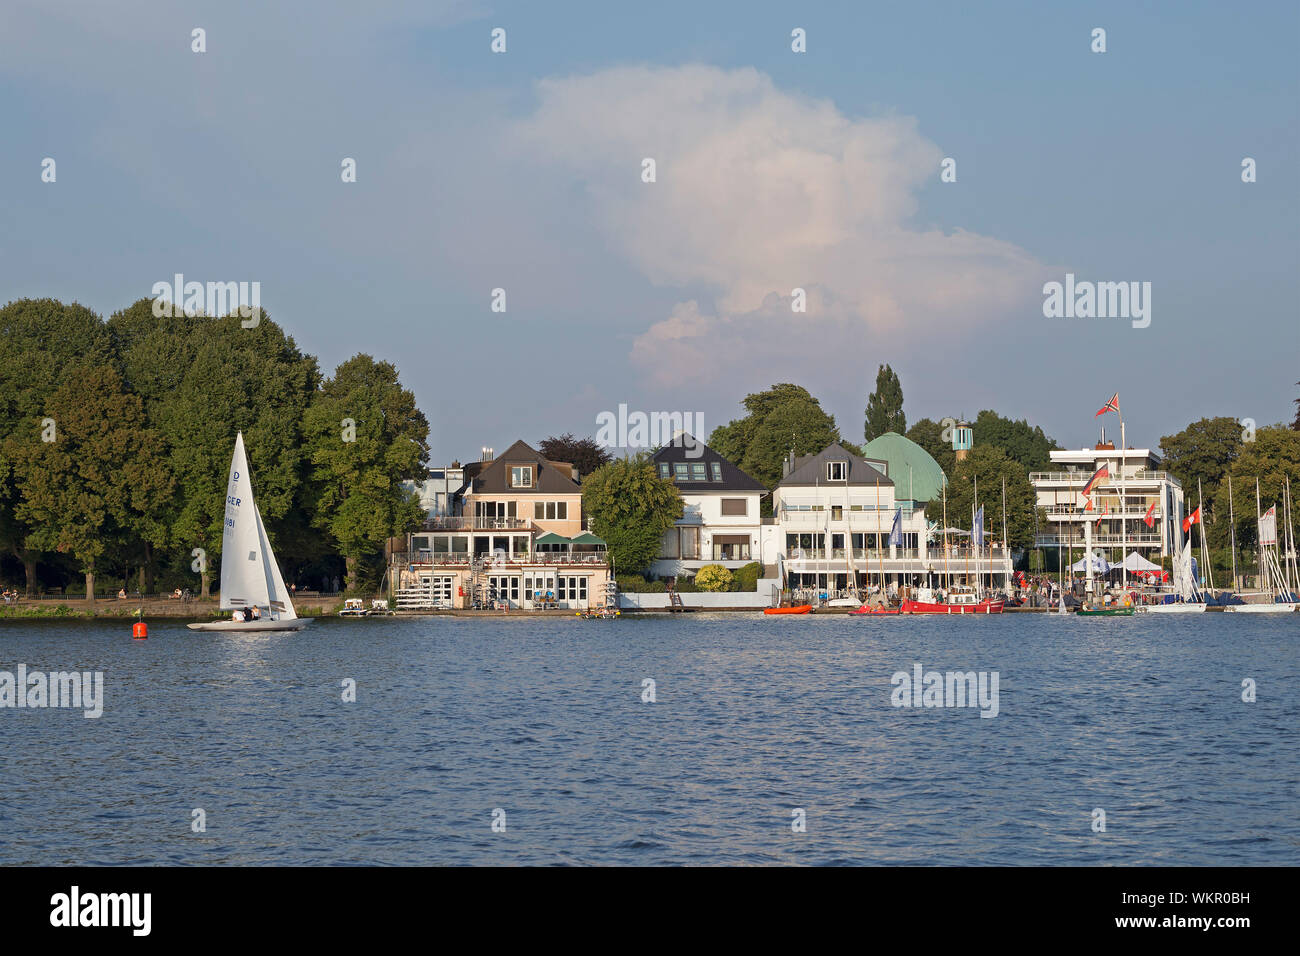 buildings at the Eastern lakefront, Outer Alster, Hamburg, Germany Stock Photo